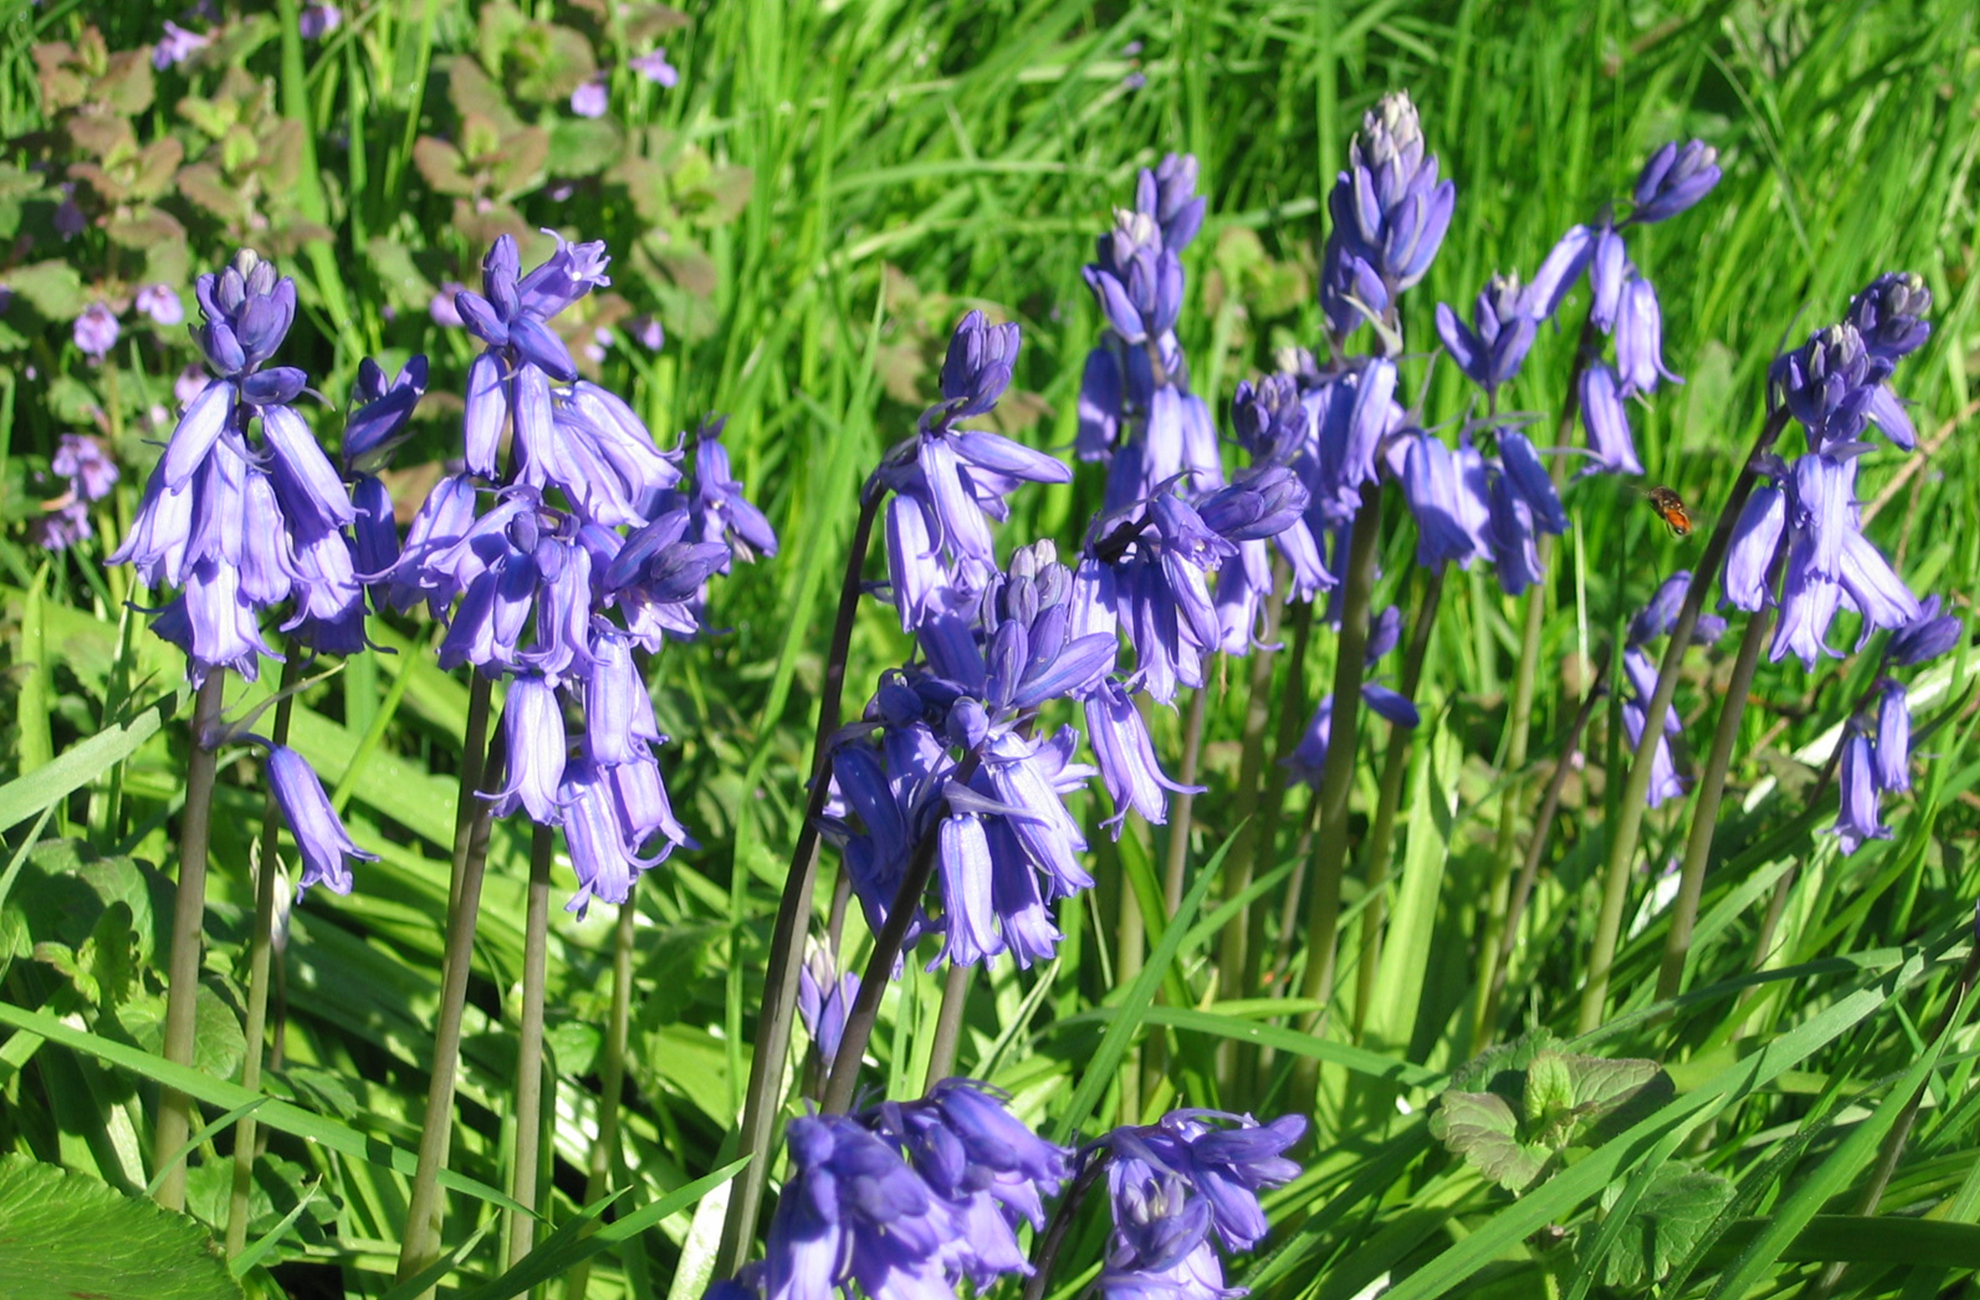 Bluebells flower in the grounds of Combermere Abbey in the Spring